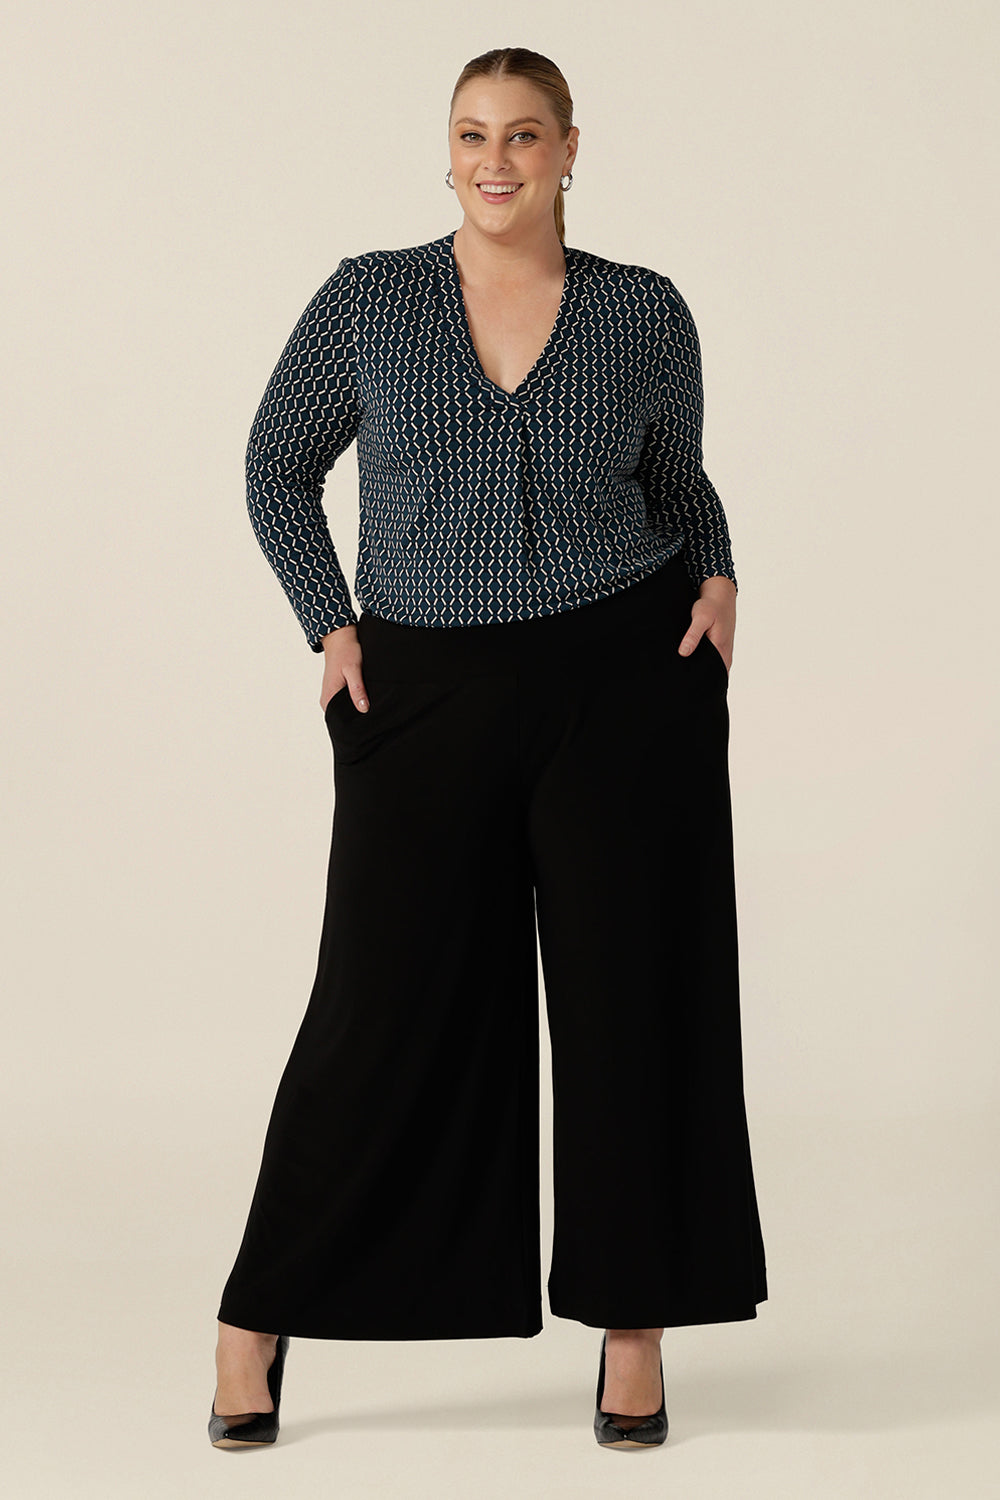 A plus size woman wears black wide leg pants with pockets and a V-neck, long sleeve work top to wear at the office. These pull-on, easy care pants are comfortable for your everyday workwear capsule wardrobe. Shop these black pants online in sizes 8 to 24, petite to plus sizes. 